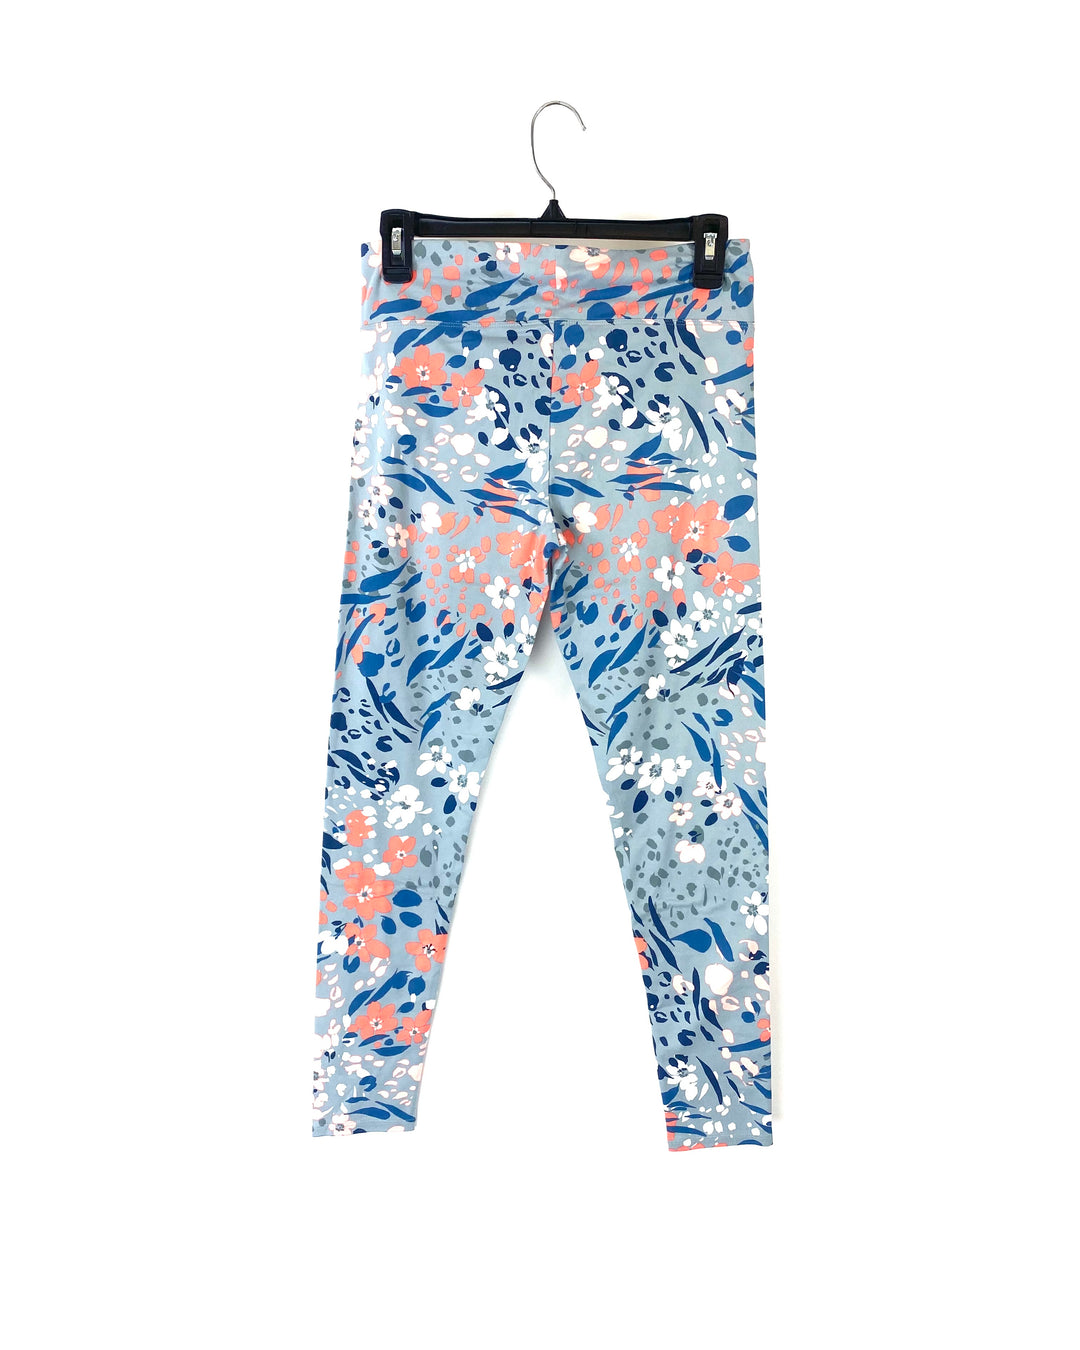 Multi-Colored Abstract Leggings - Small